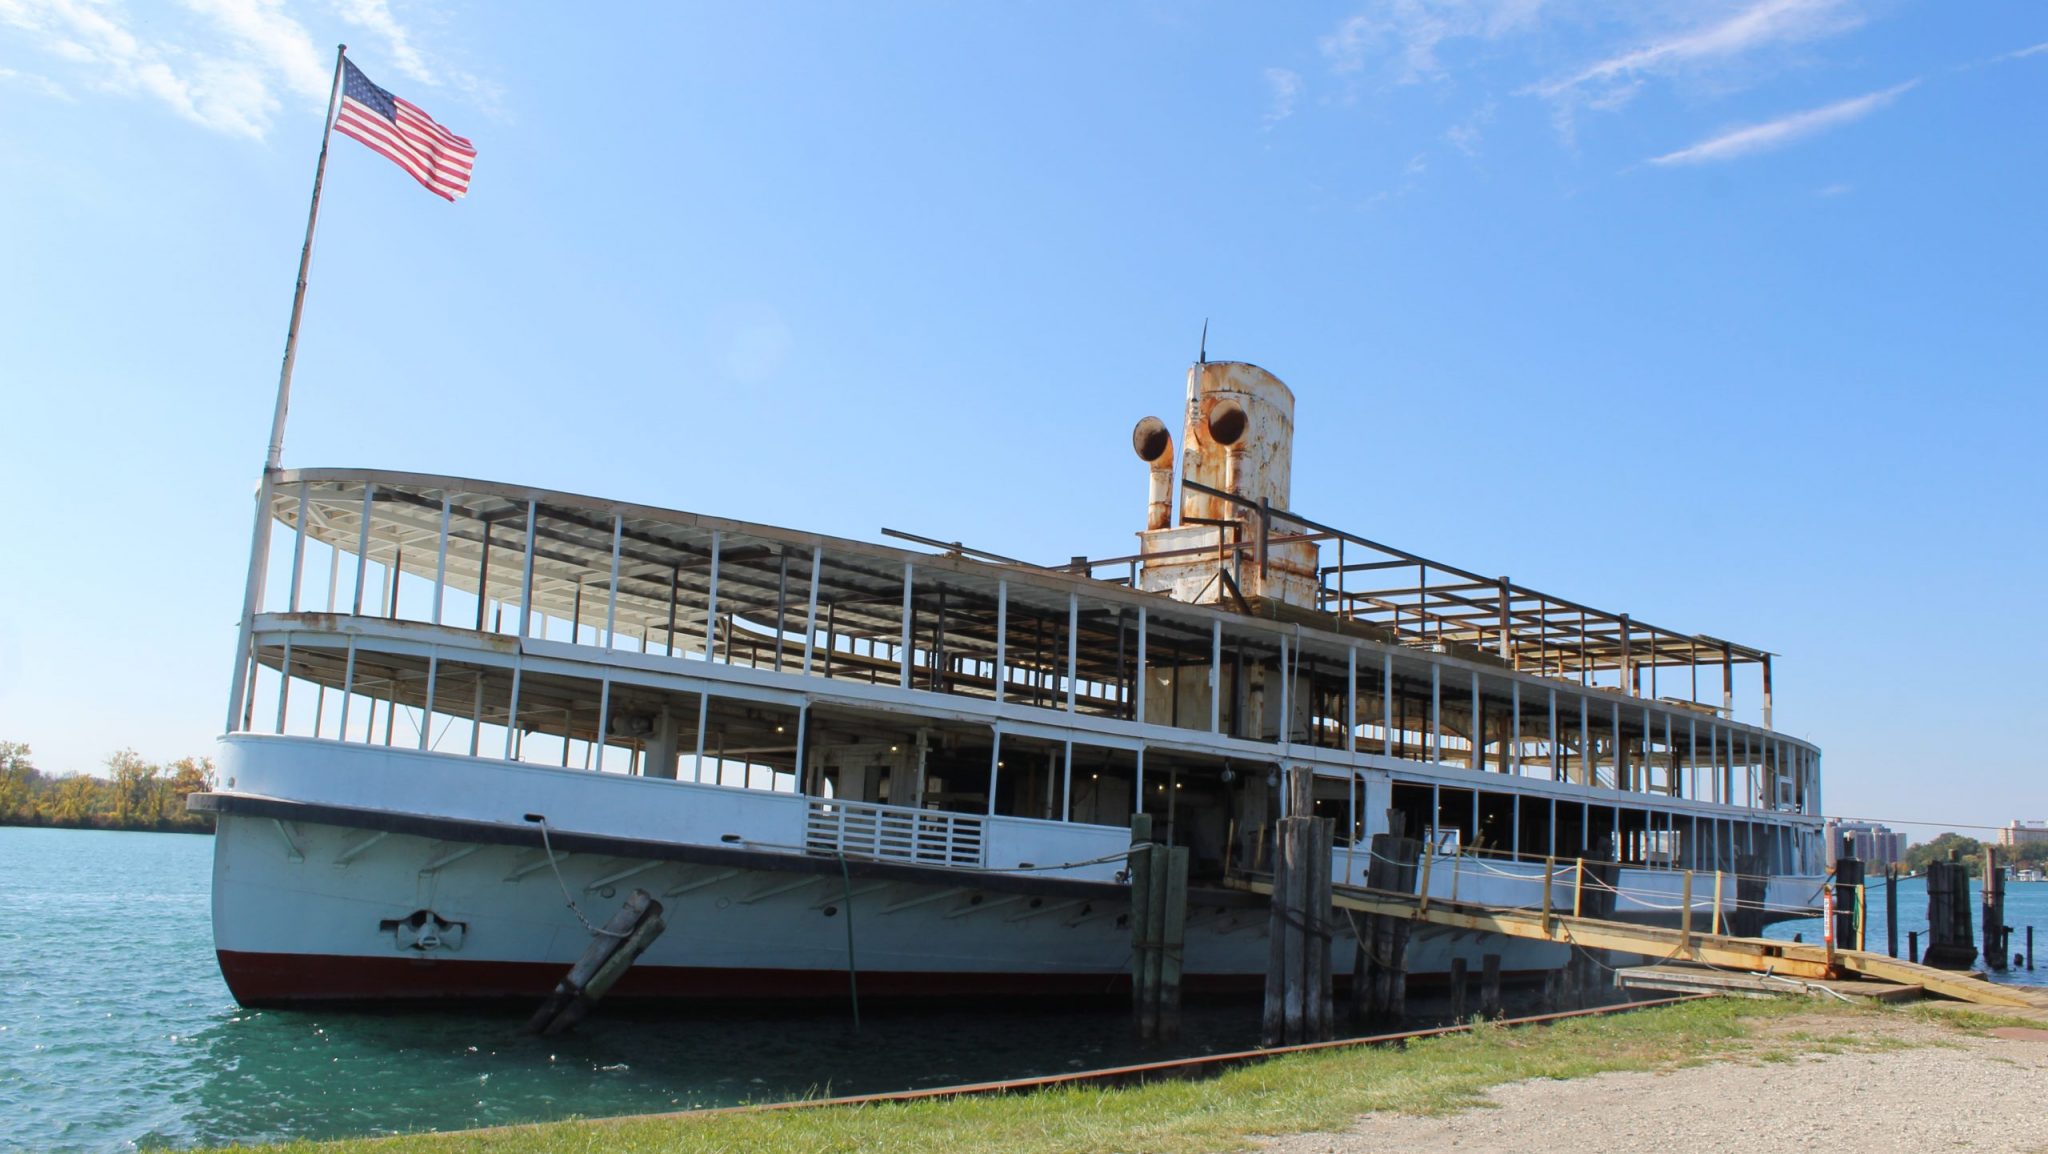 The Ste. Claire, a former Boblo boat, is being renovated at Riverside Marina in Detroit.